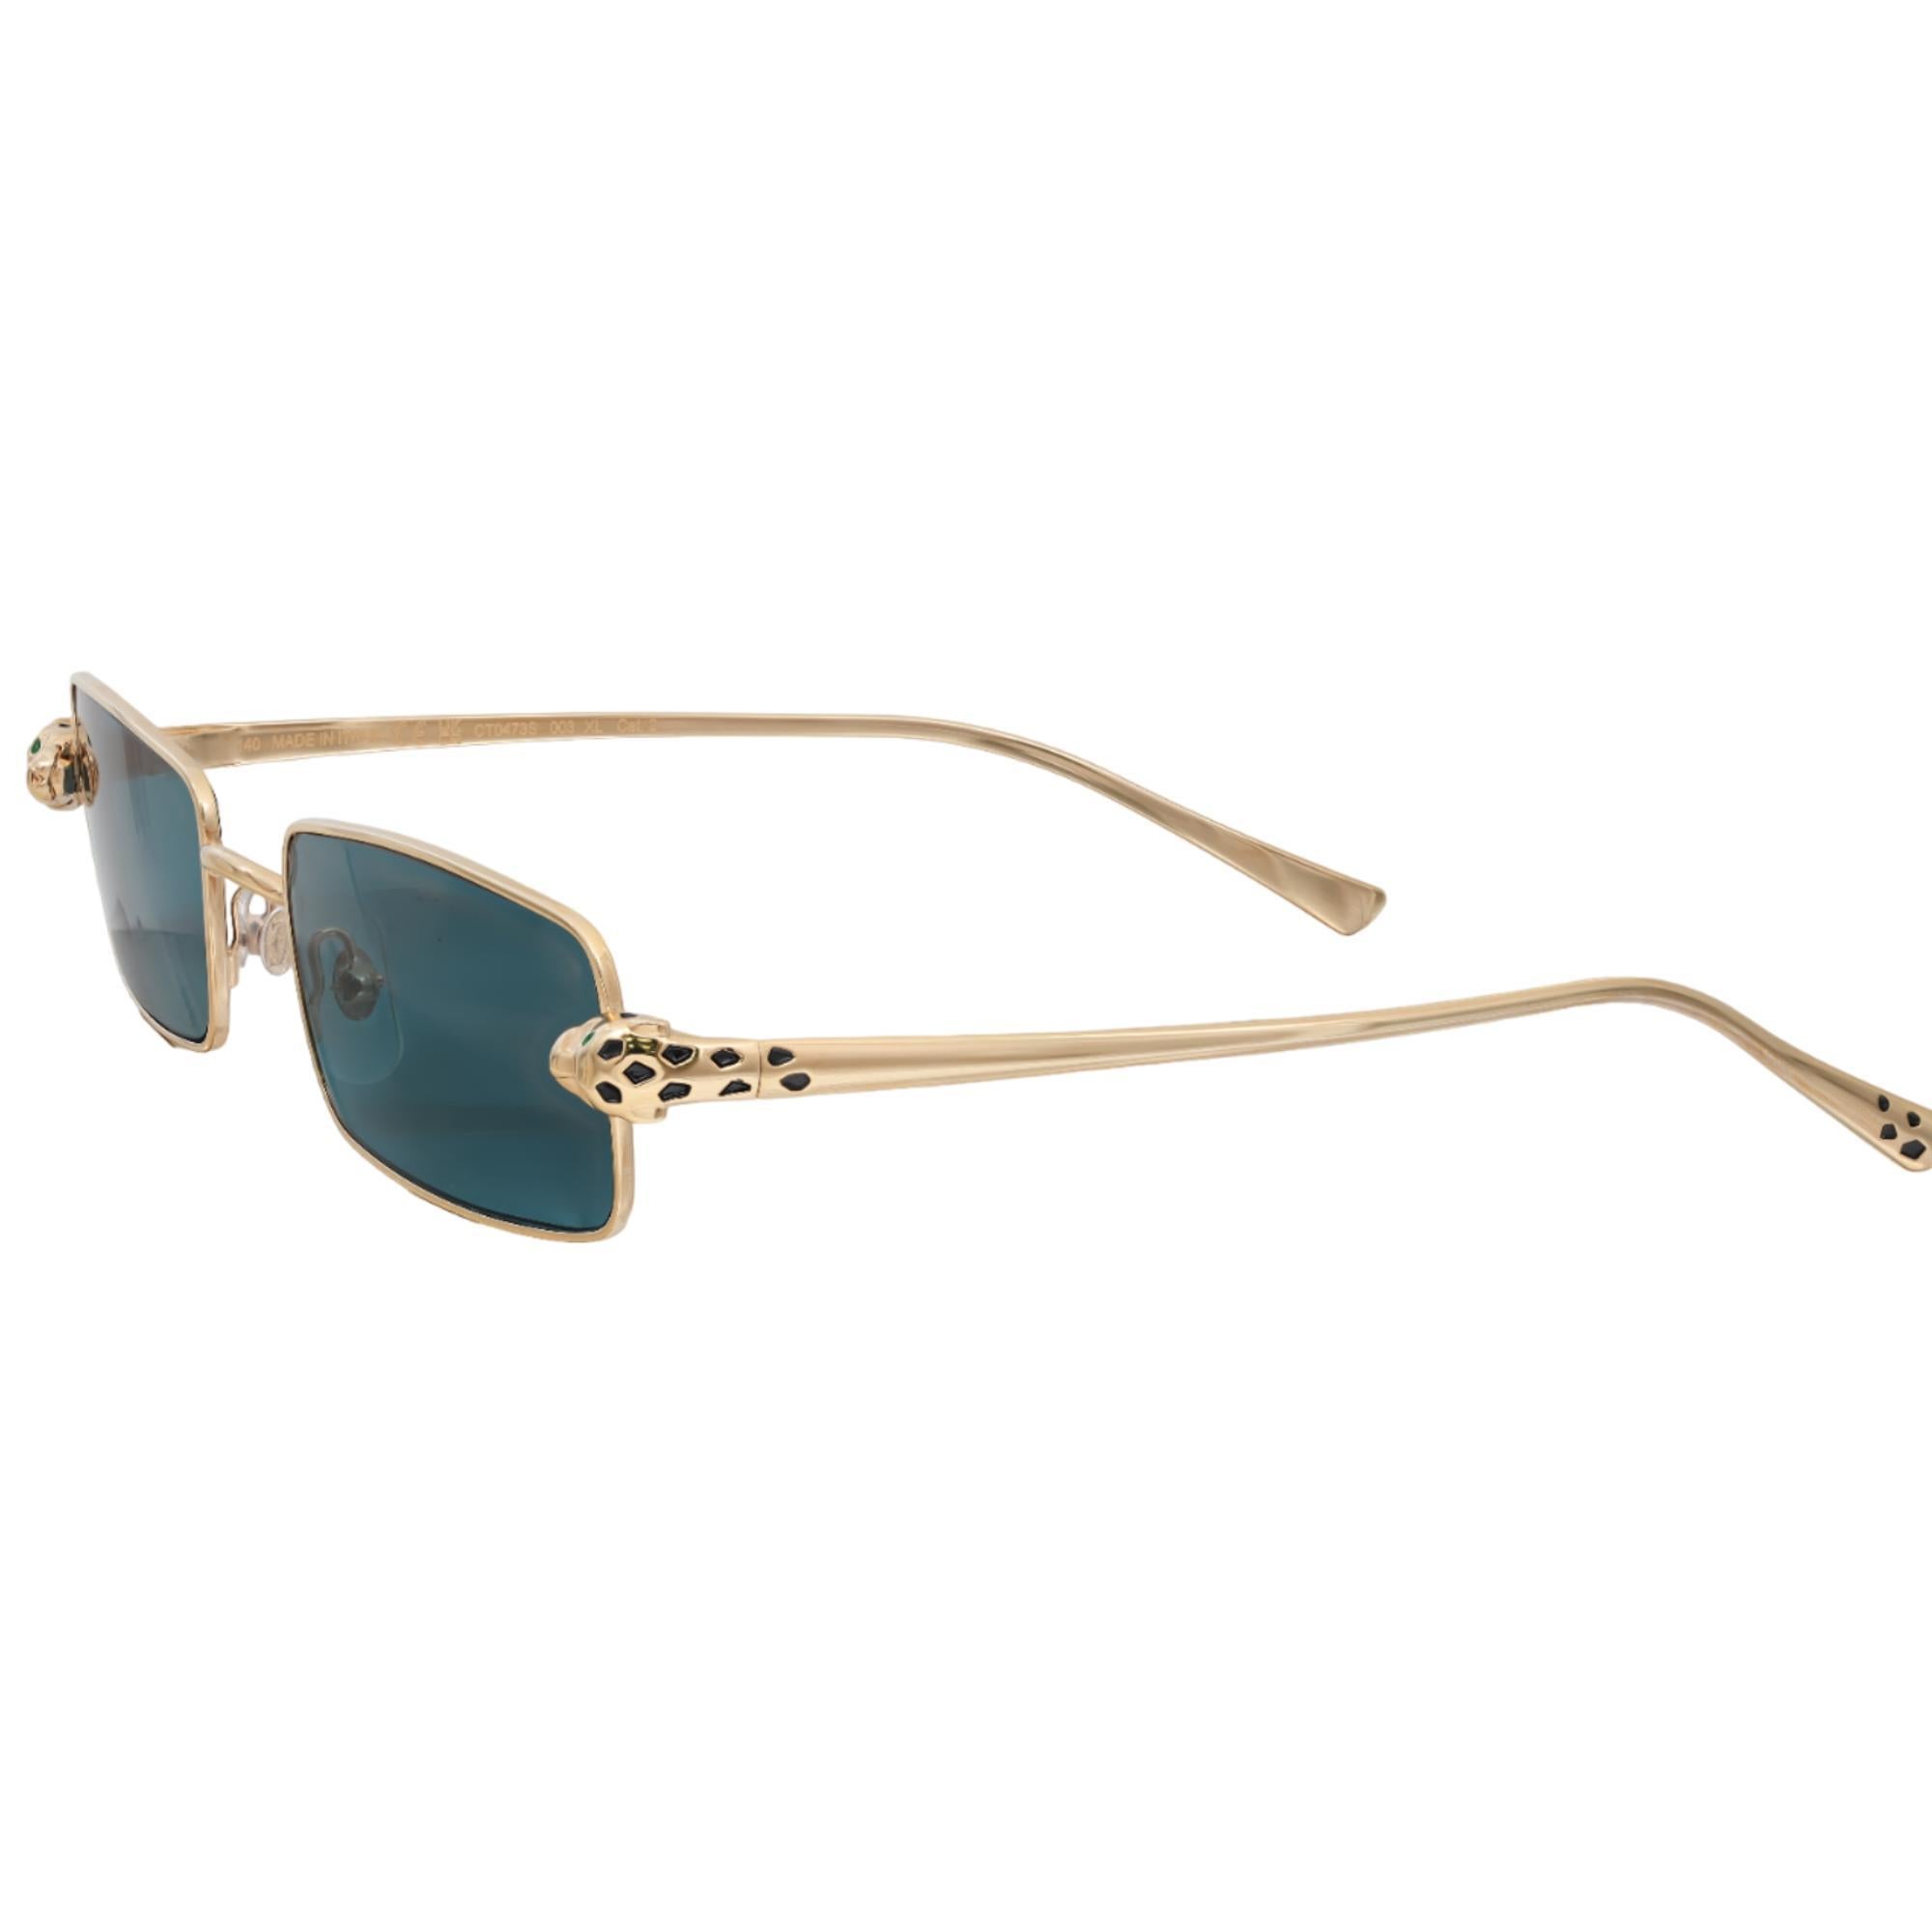 Cartier Panthere De Cartier Metal Golden Finish Rectangular Shape Sunglasses In New Condition For Sale In New York, NY